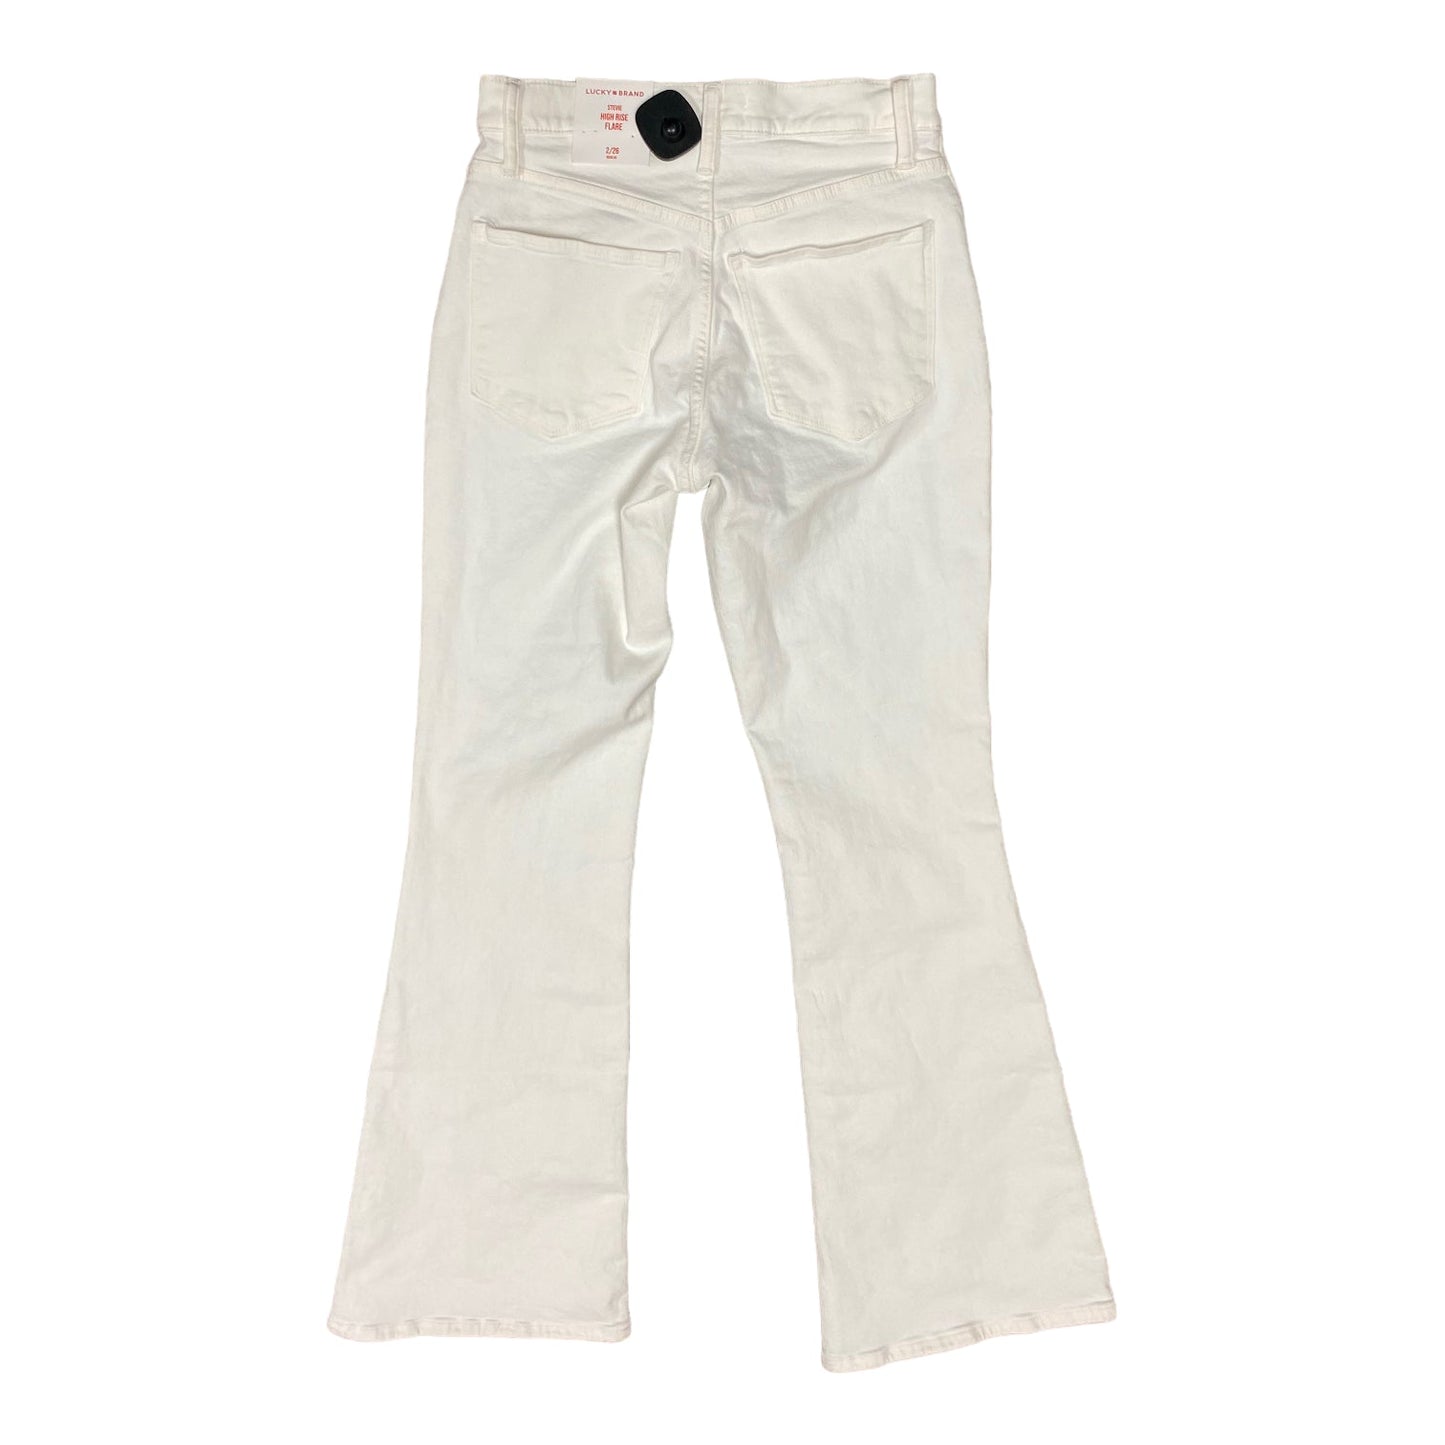 White Jeans Flared Lucky Brand, Size 2